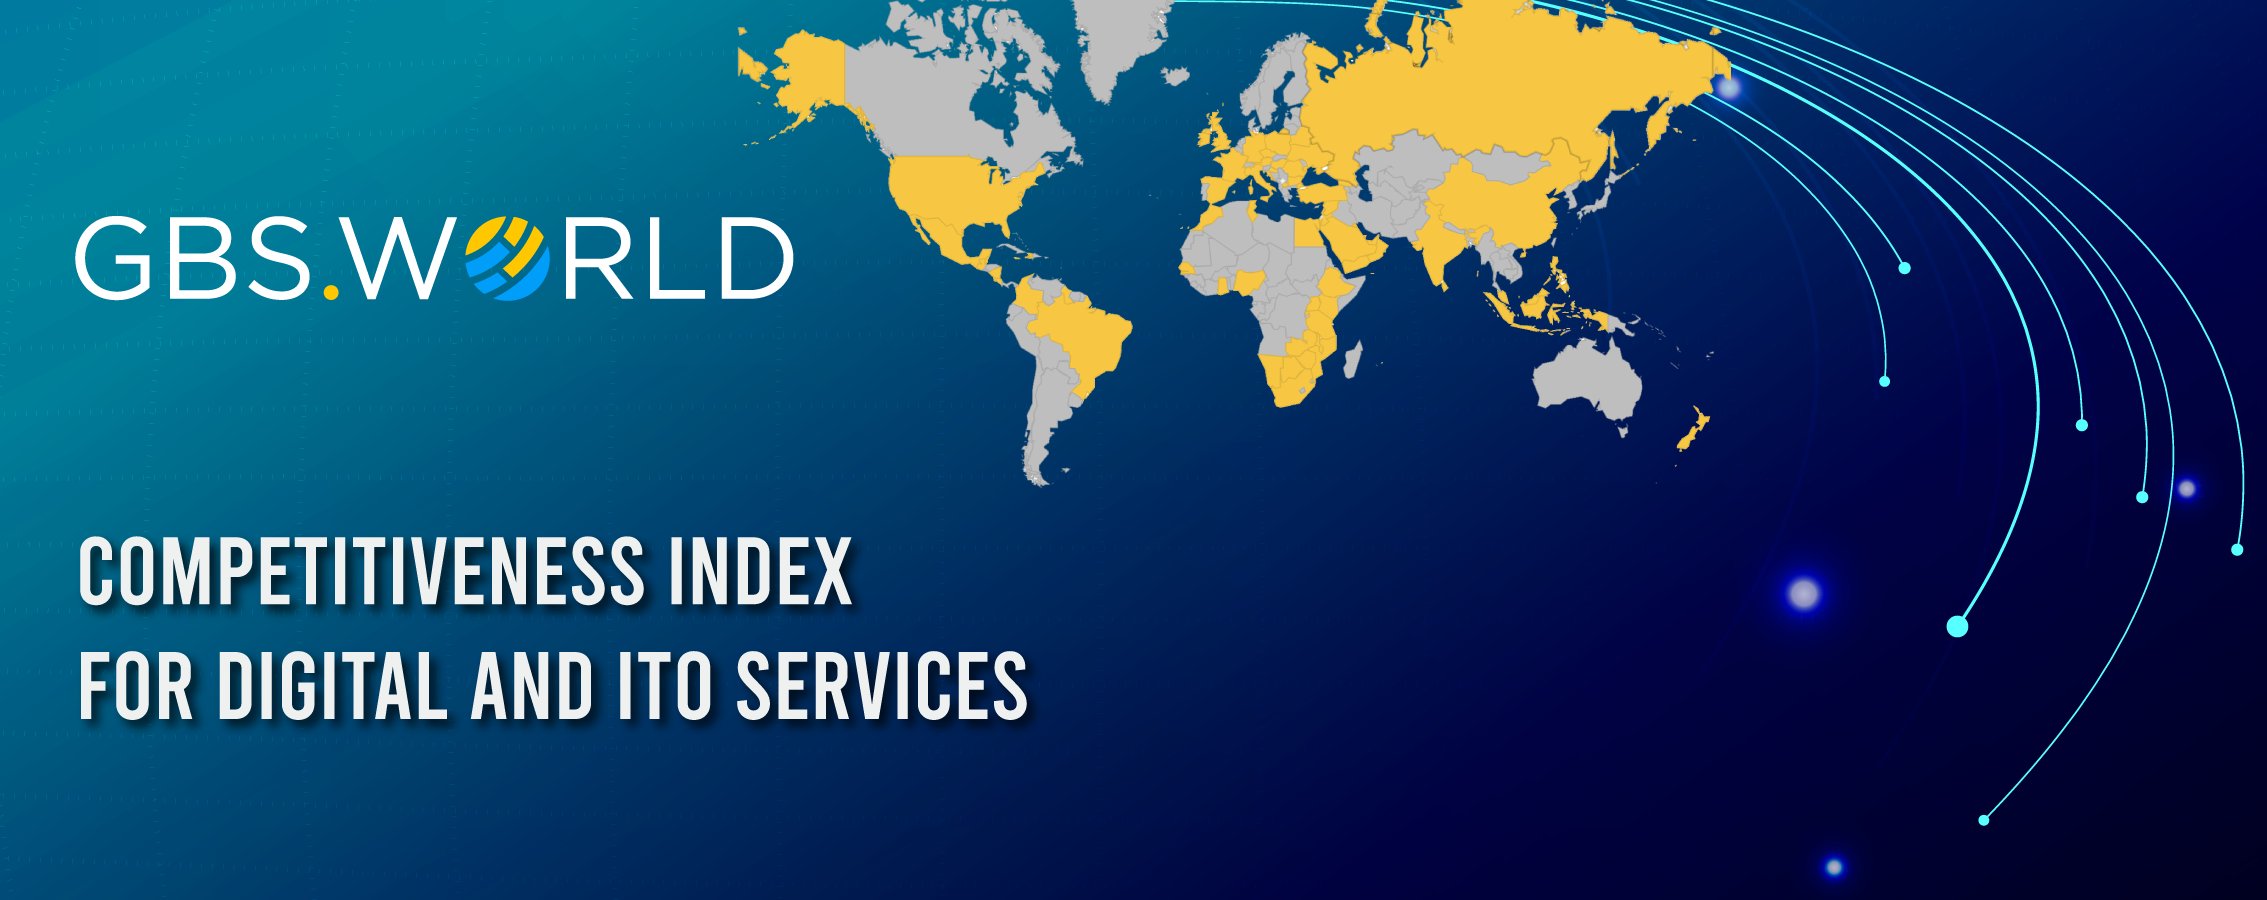 GBS World Competitiveness Index Releases Advance Results for Digital and ITO services